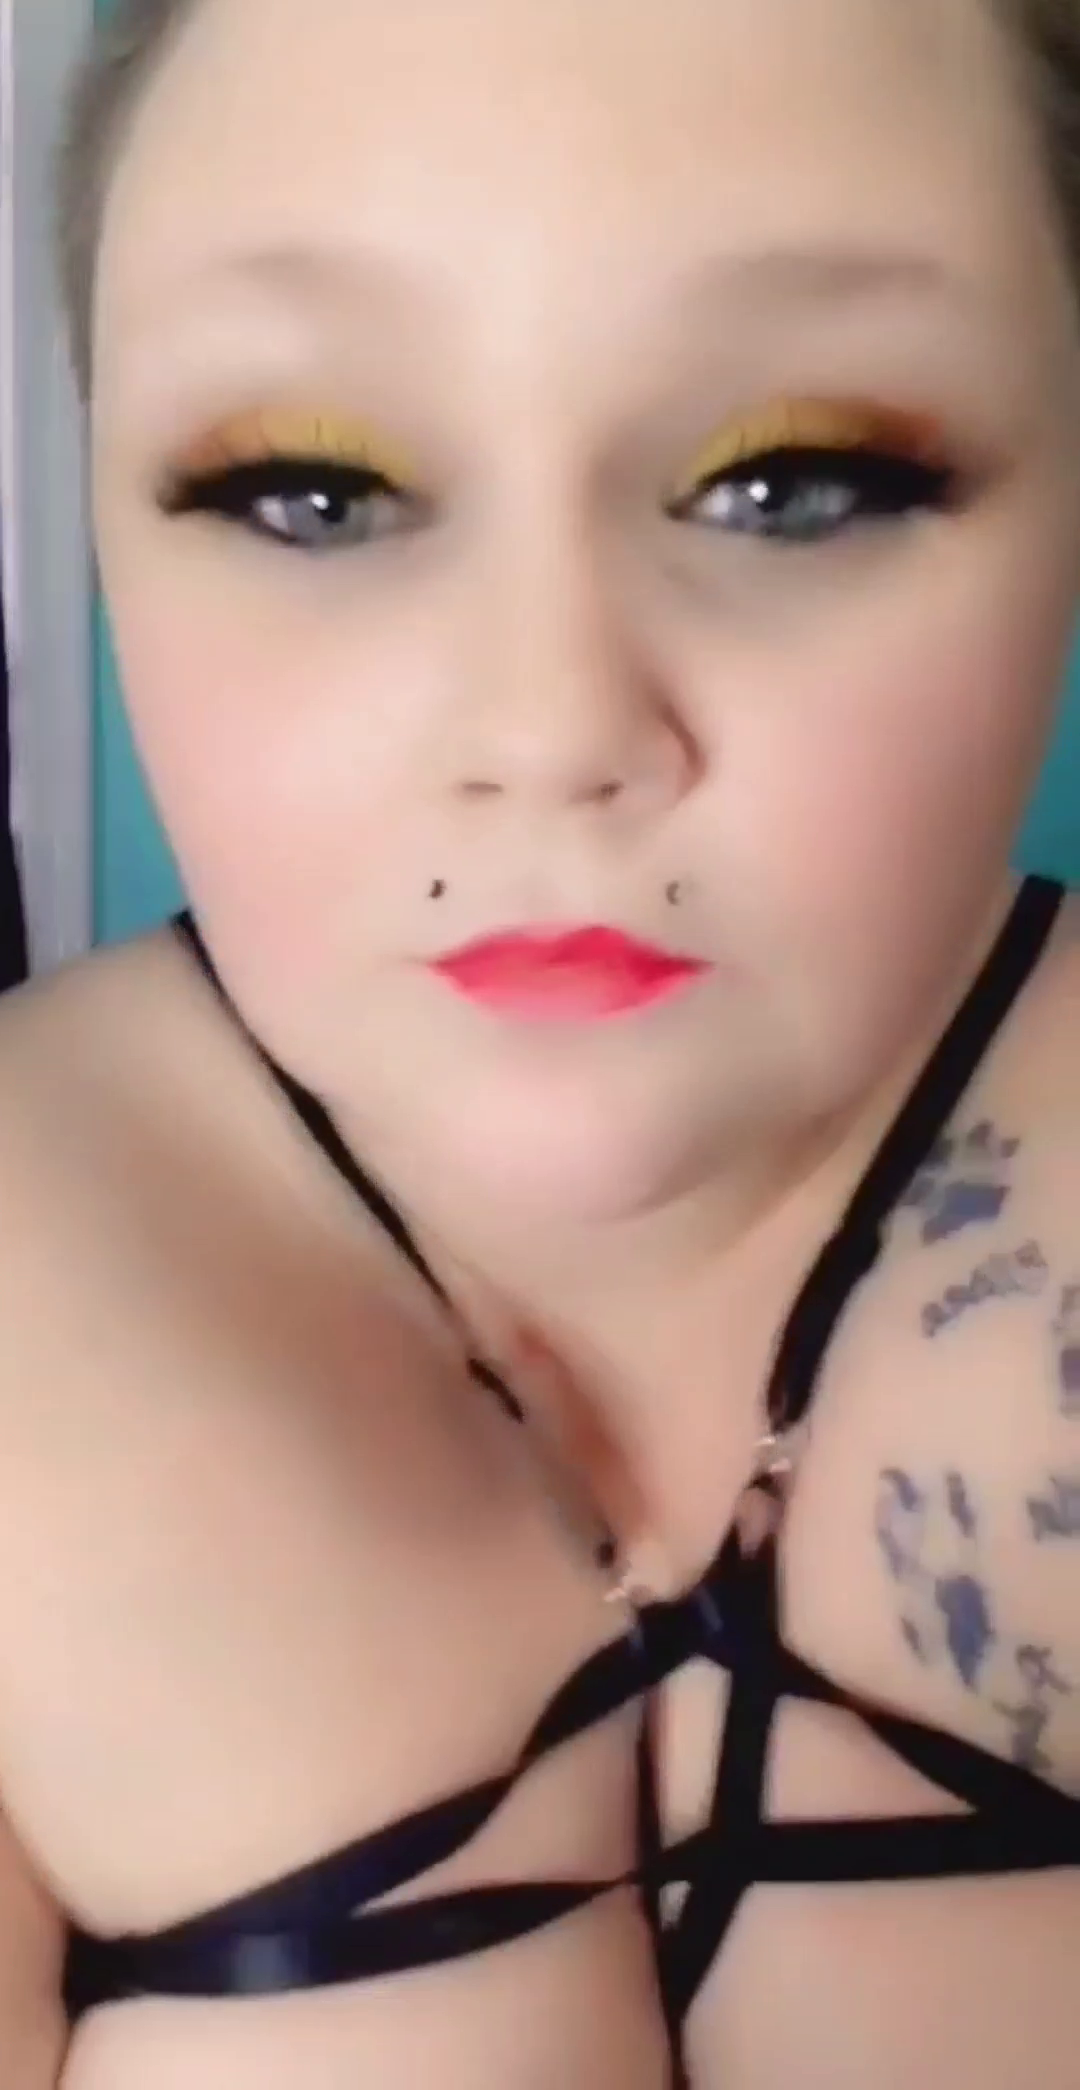 Video by Vixey Maeve with the username @vixeymaeve, who is a star user,  April 7, 2020 at 3:18 AM and the text says 'Getting your face fucked is 10 times hotter when your lipstick gets smudged 🤤
View the video that goes wirh this clip at my website!'